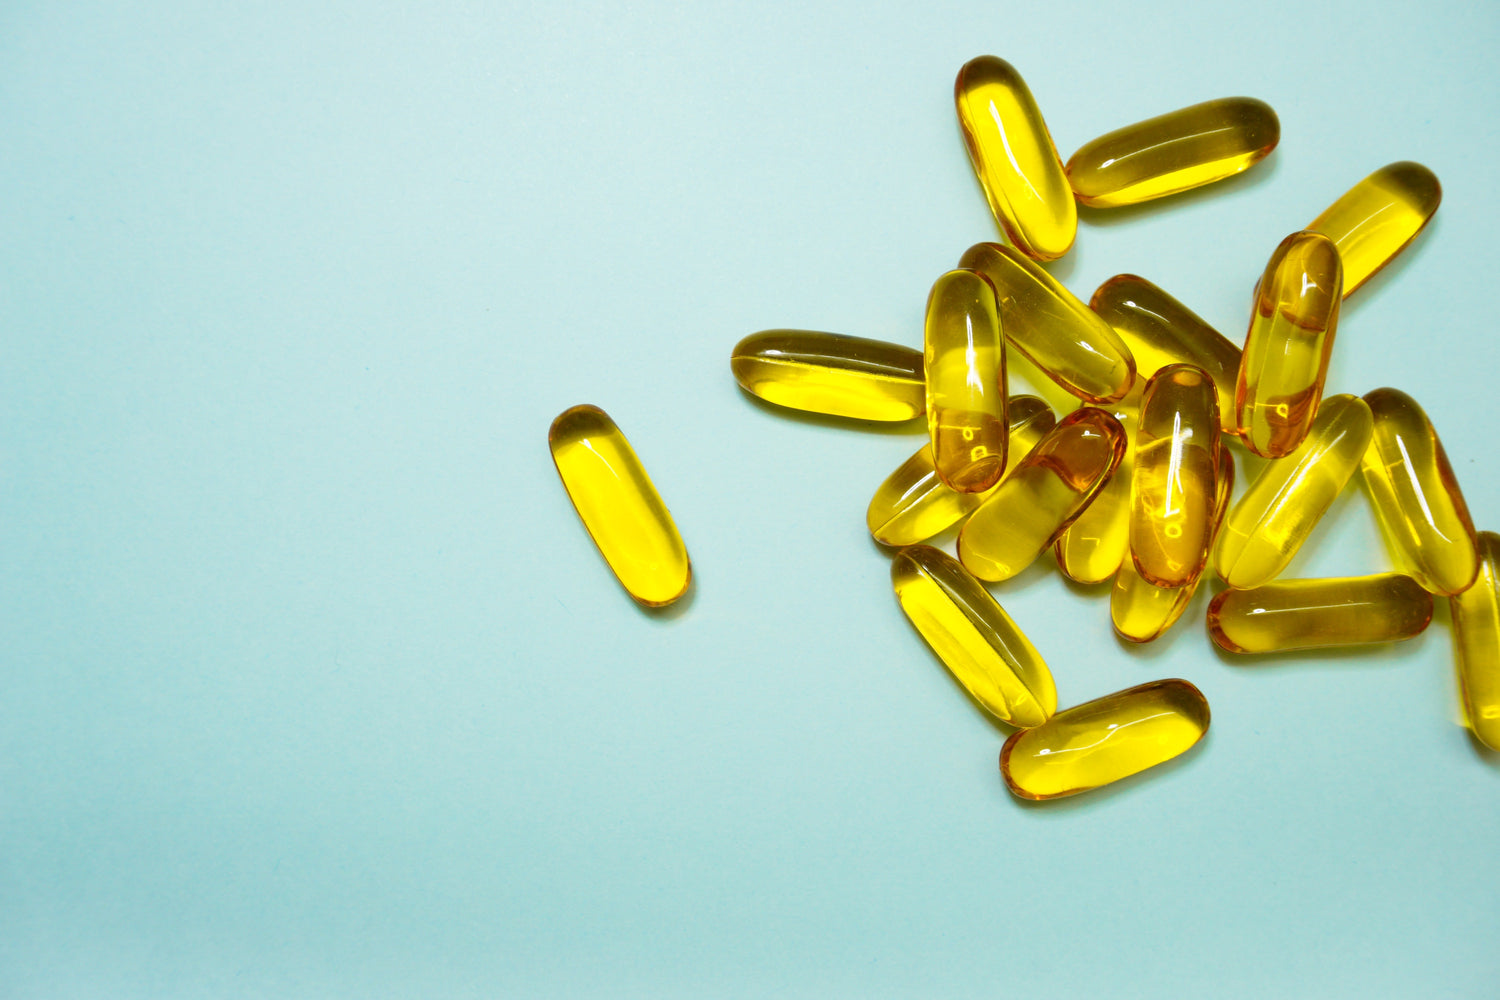 Memory Supplements: Which Ones Actually Work?